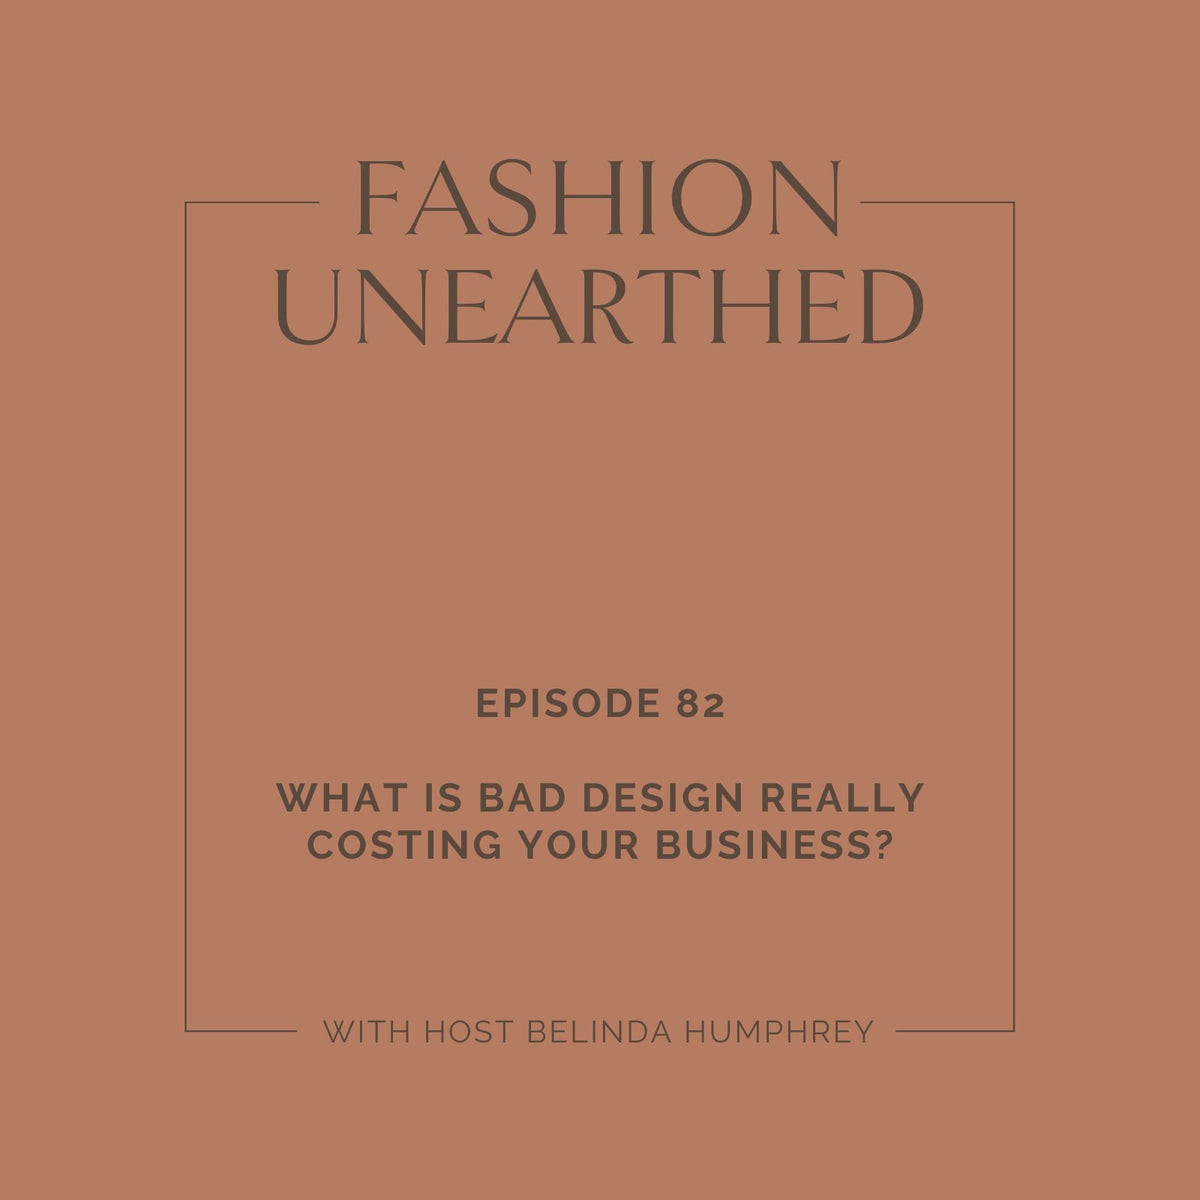 Episode 82: What is bad design really costing your business?